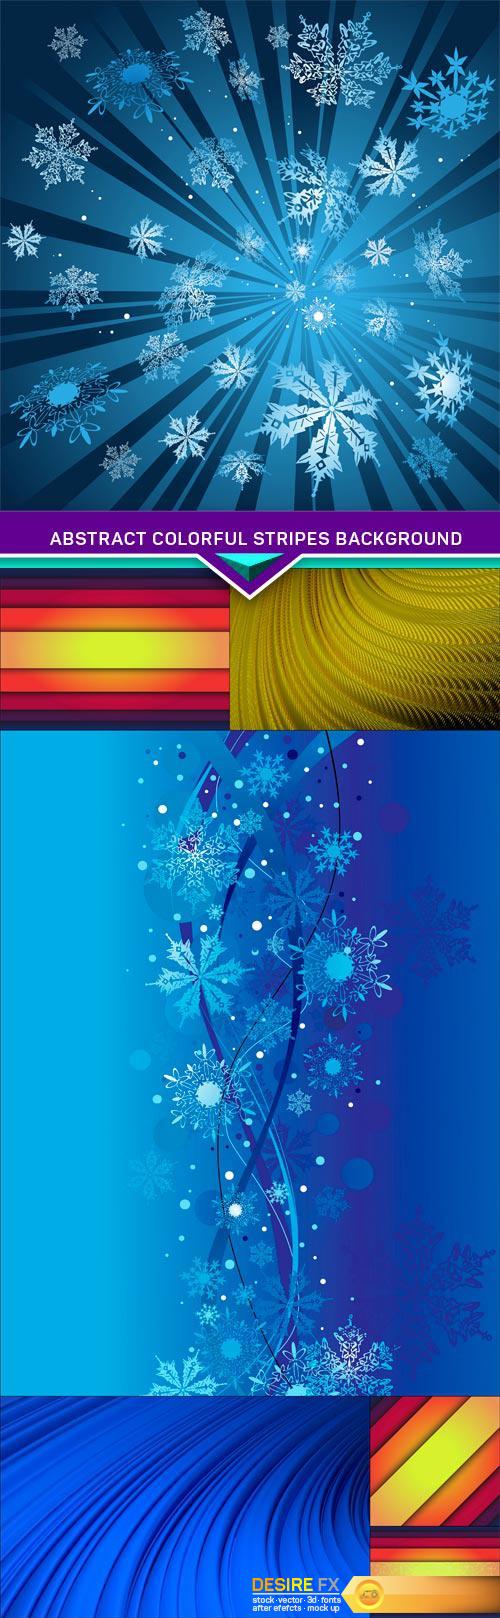 Abstract colorful stripes background 7X JPEG